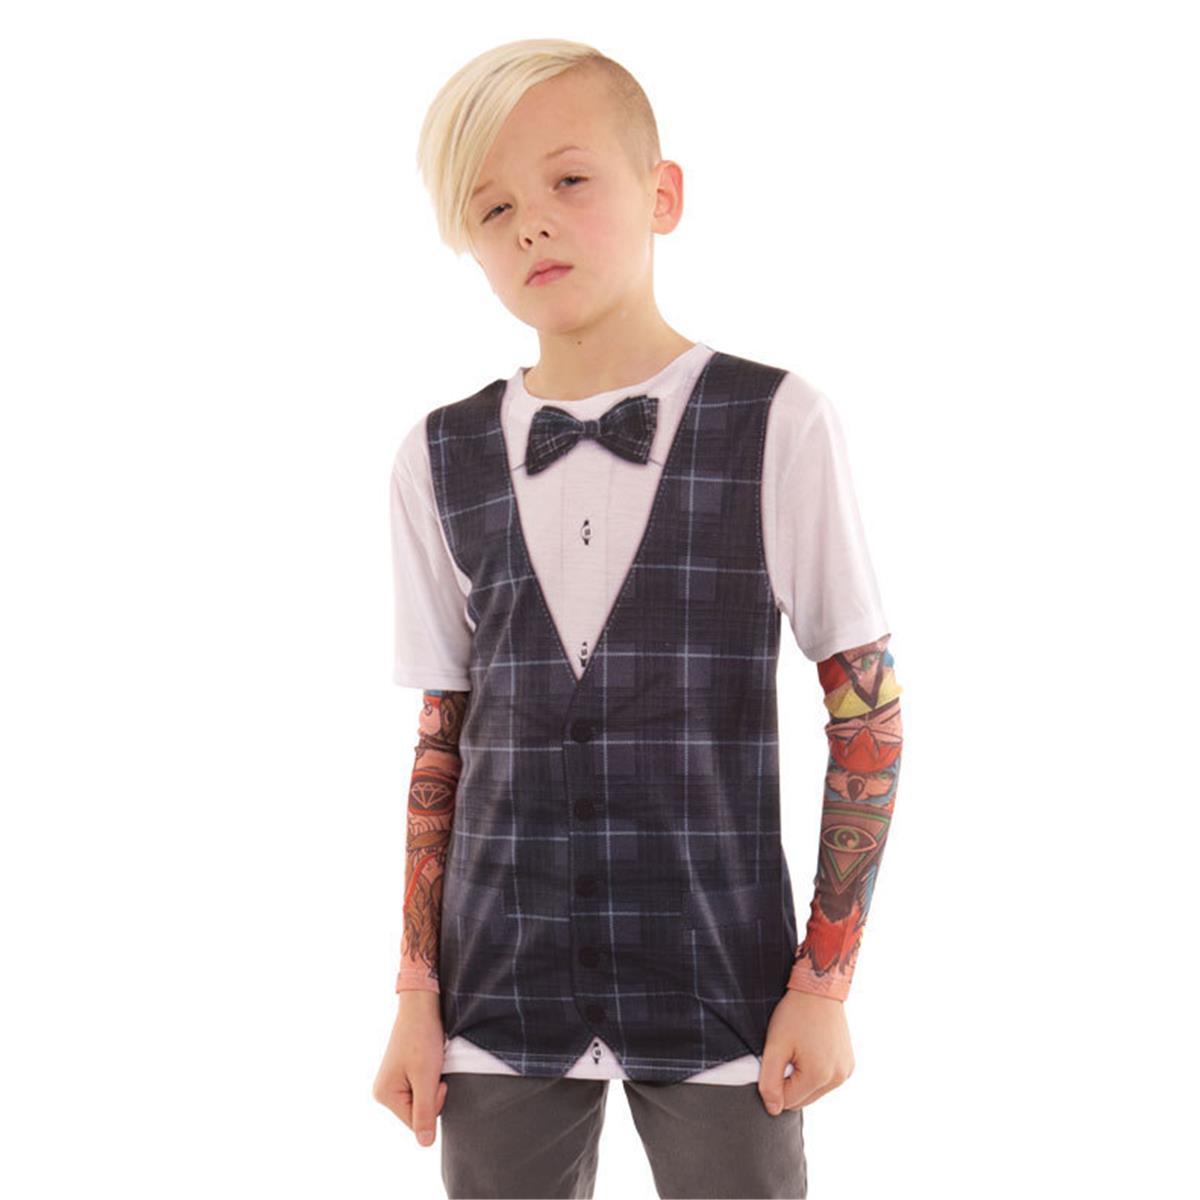 F134199-xl Youth Hipster Vest With Tattoo, Black - Extra Large